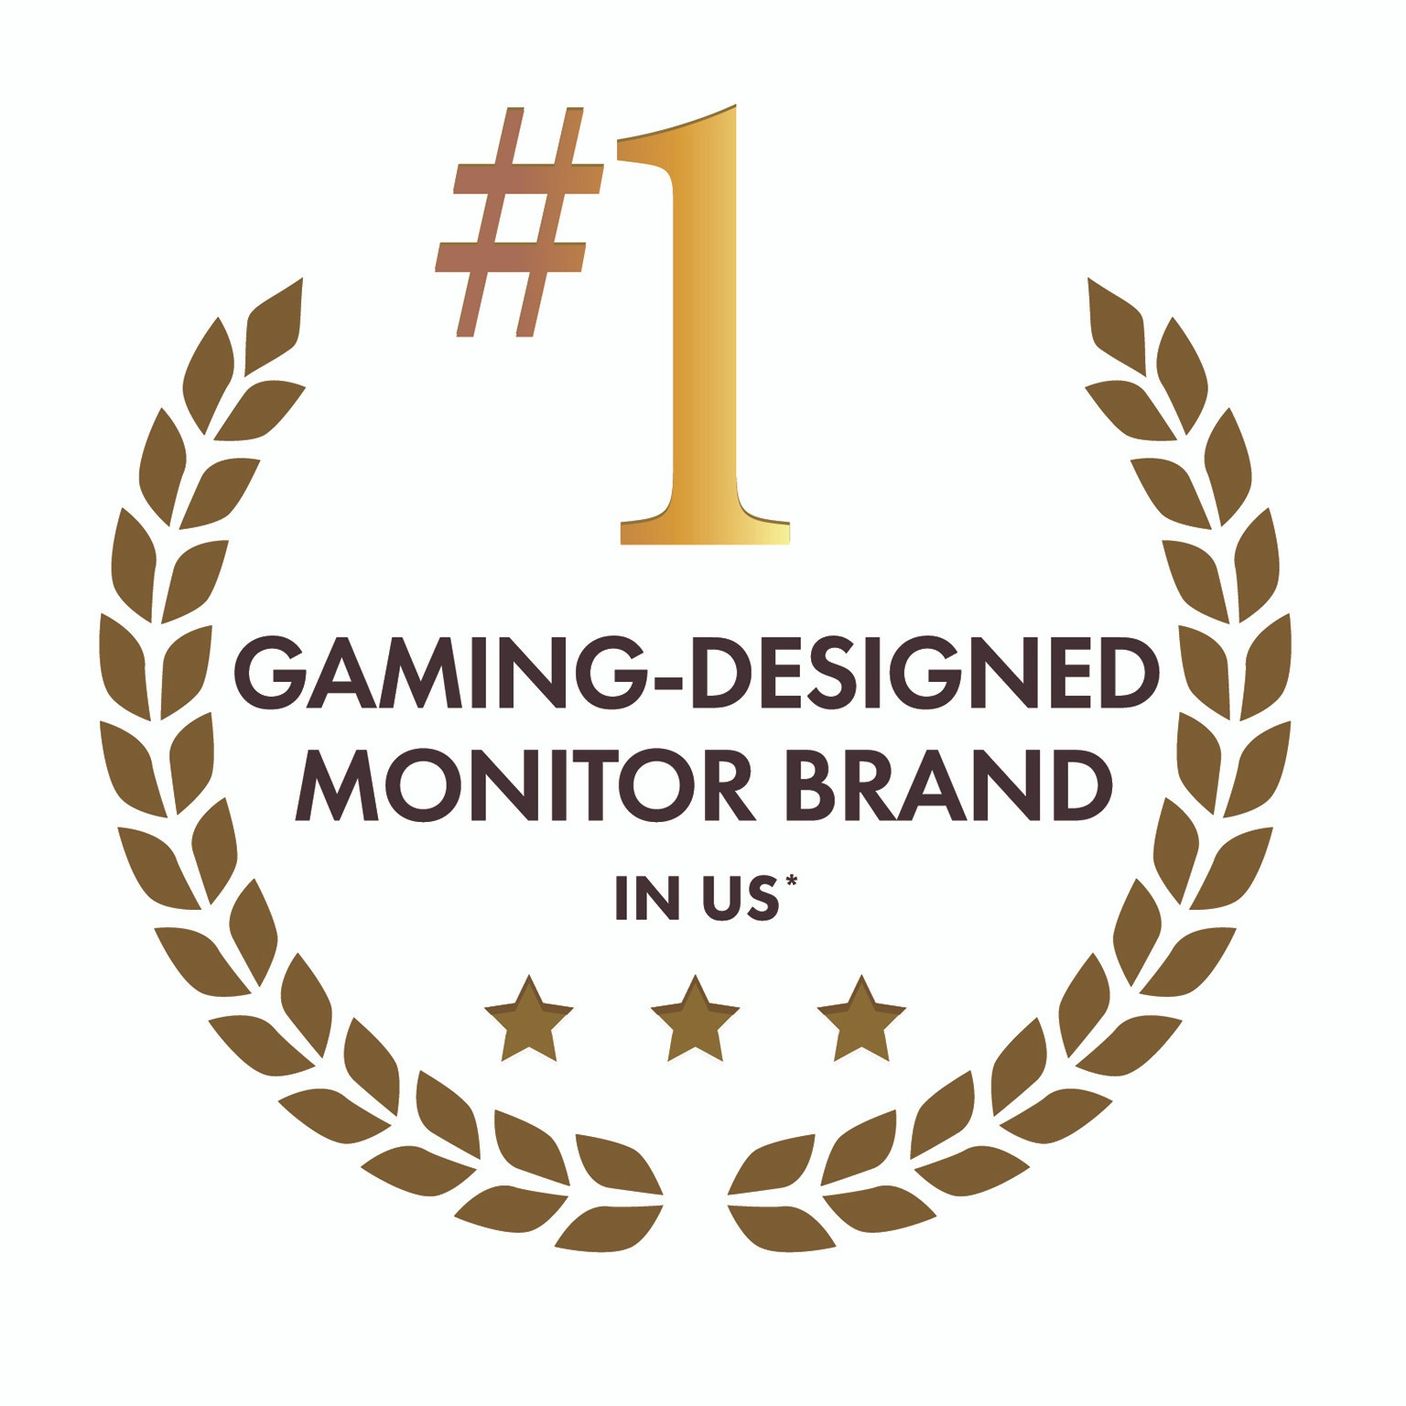 #1 Gaming-Designed Monitor Brand in the U.S.*1